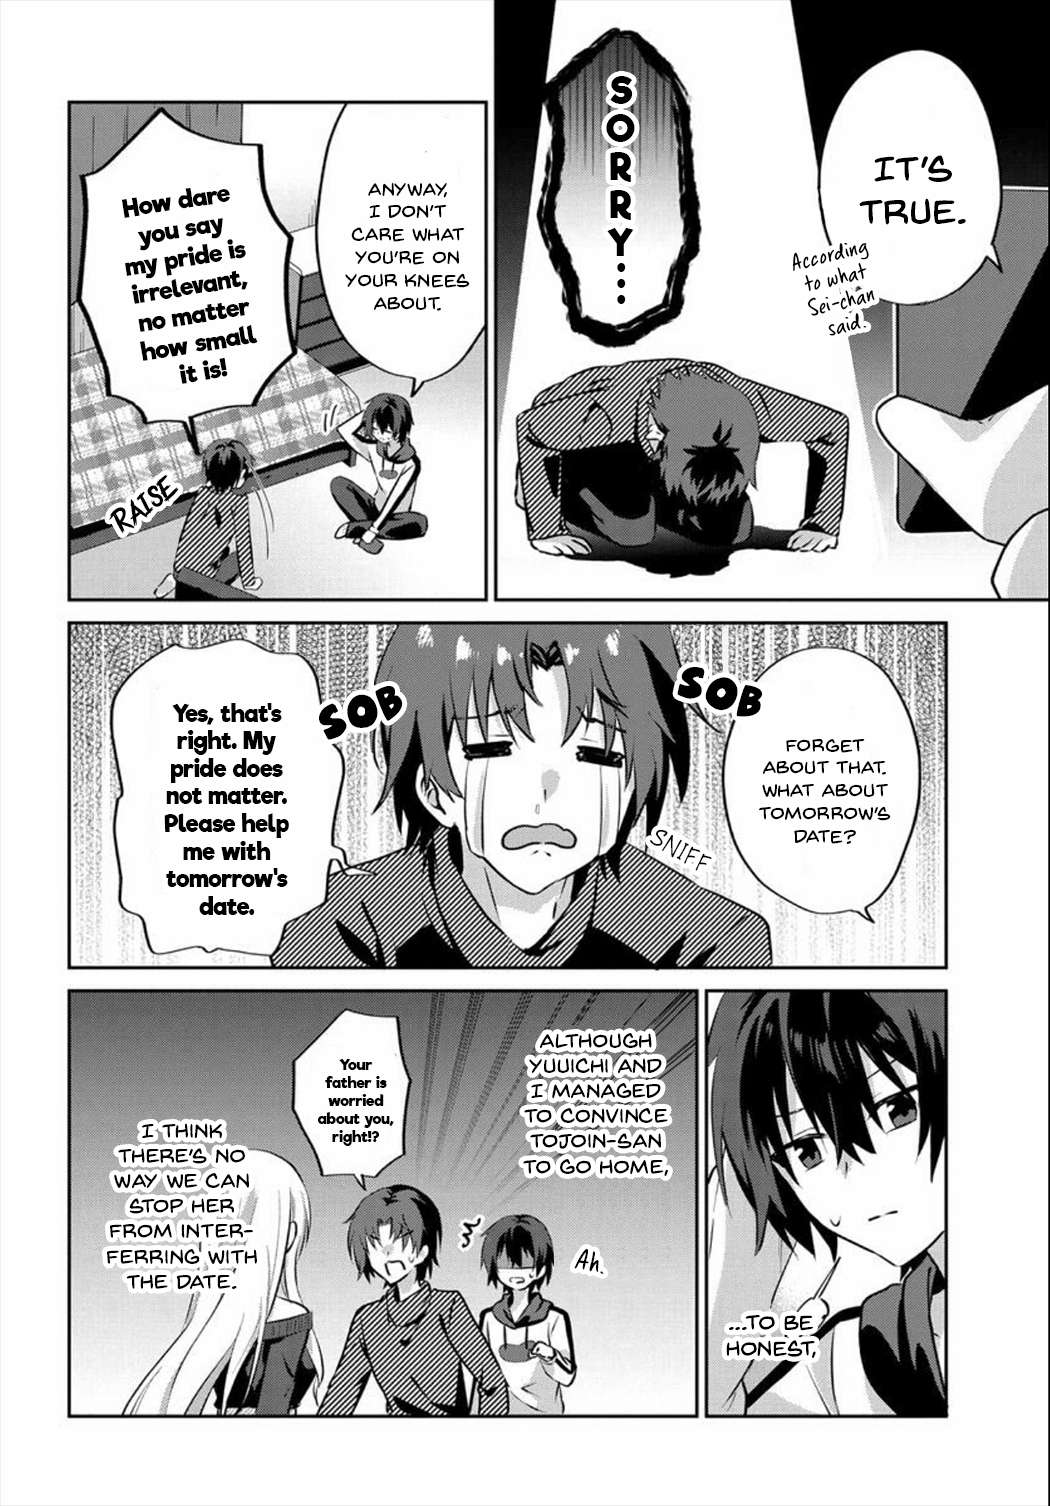 Since I’ve Entered the World of Romantic Comedy Manga, I’ll Do My Best to Make the Losing Heroine Happy. - chapter 6.1 - #4